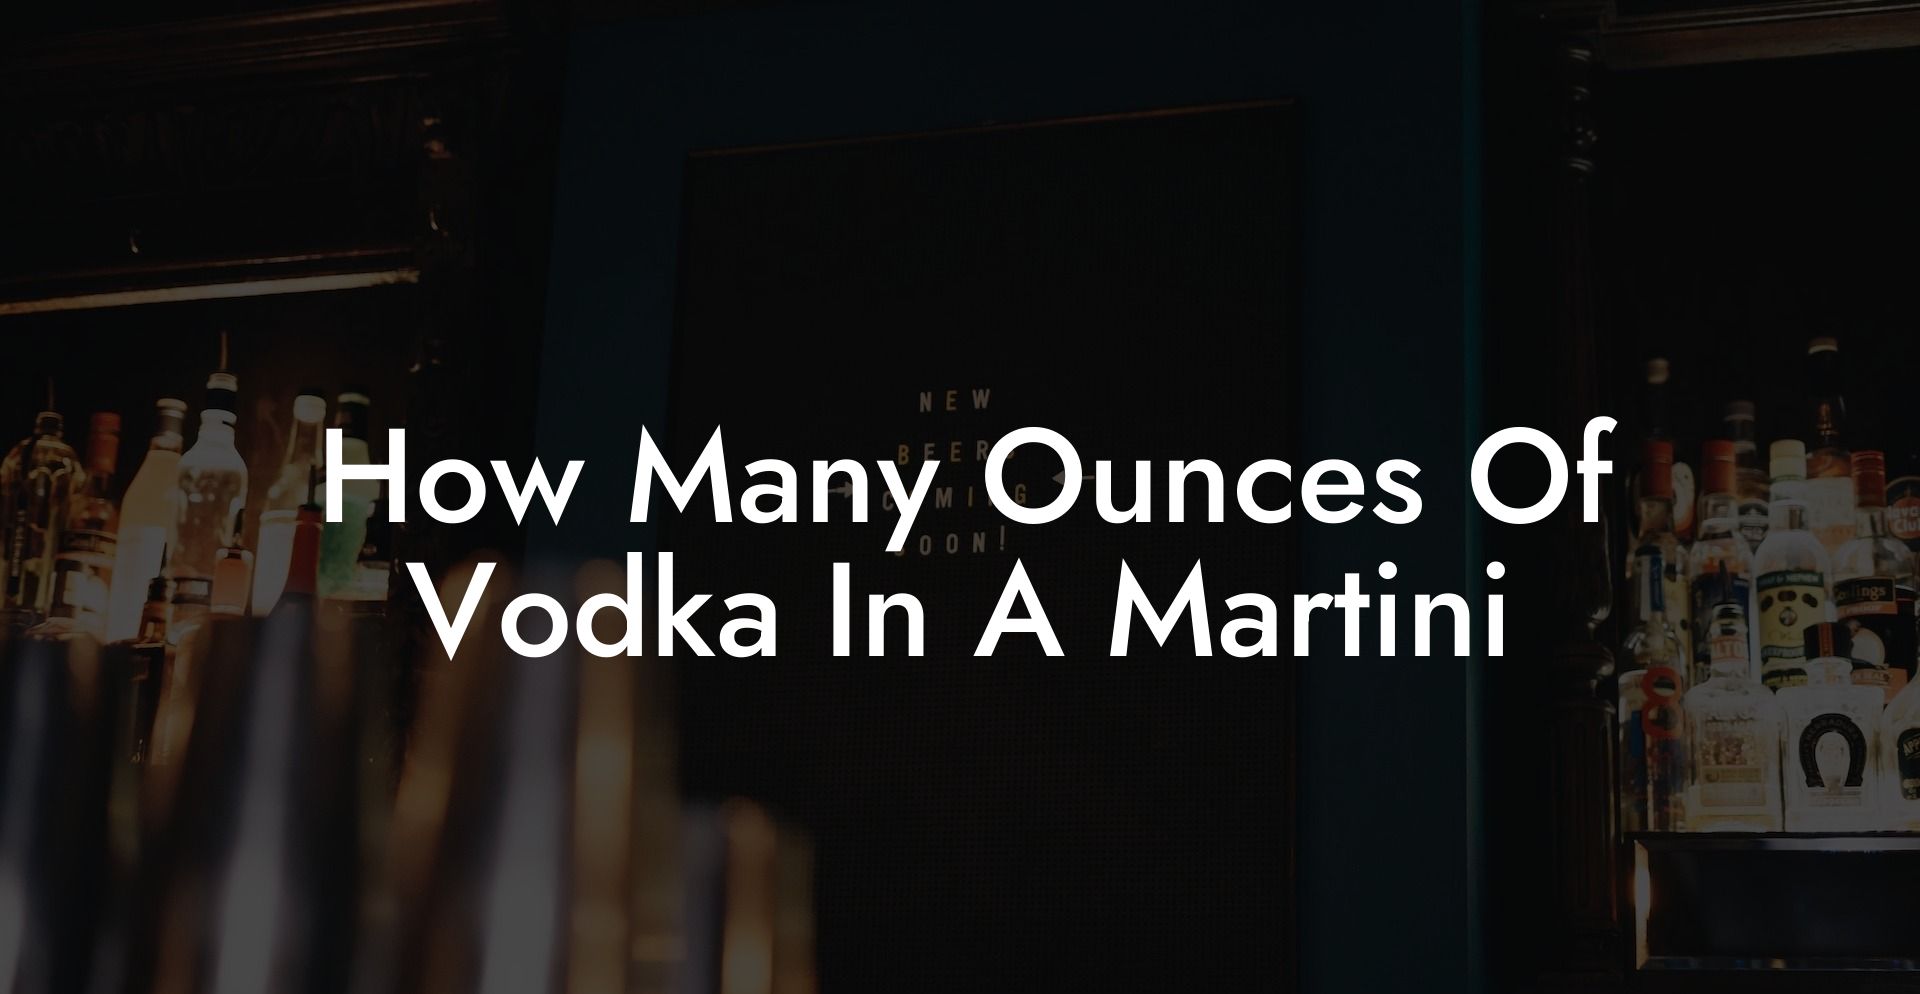 How Many Ounces Of Vodka In A Martini